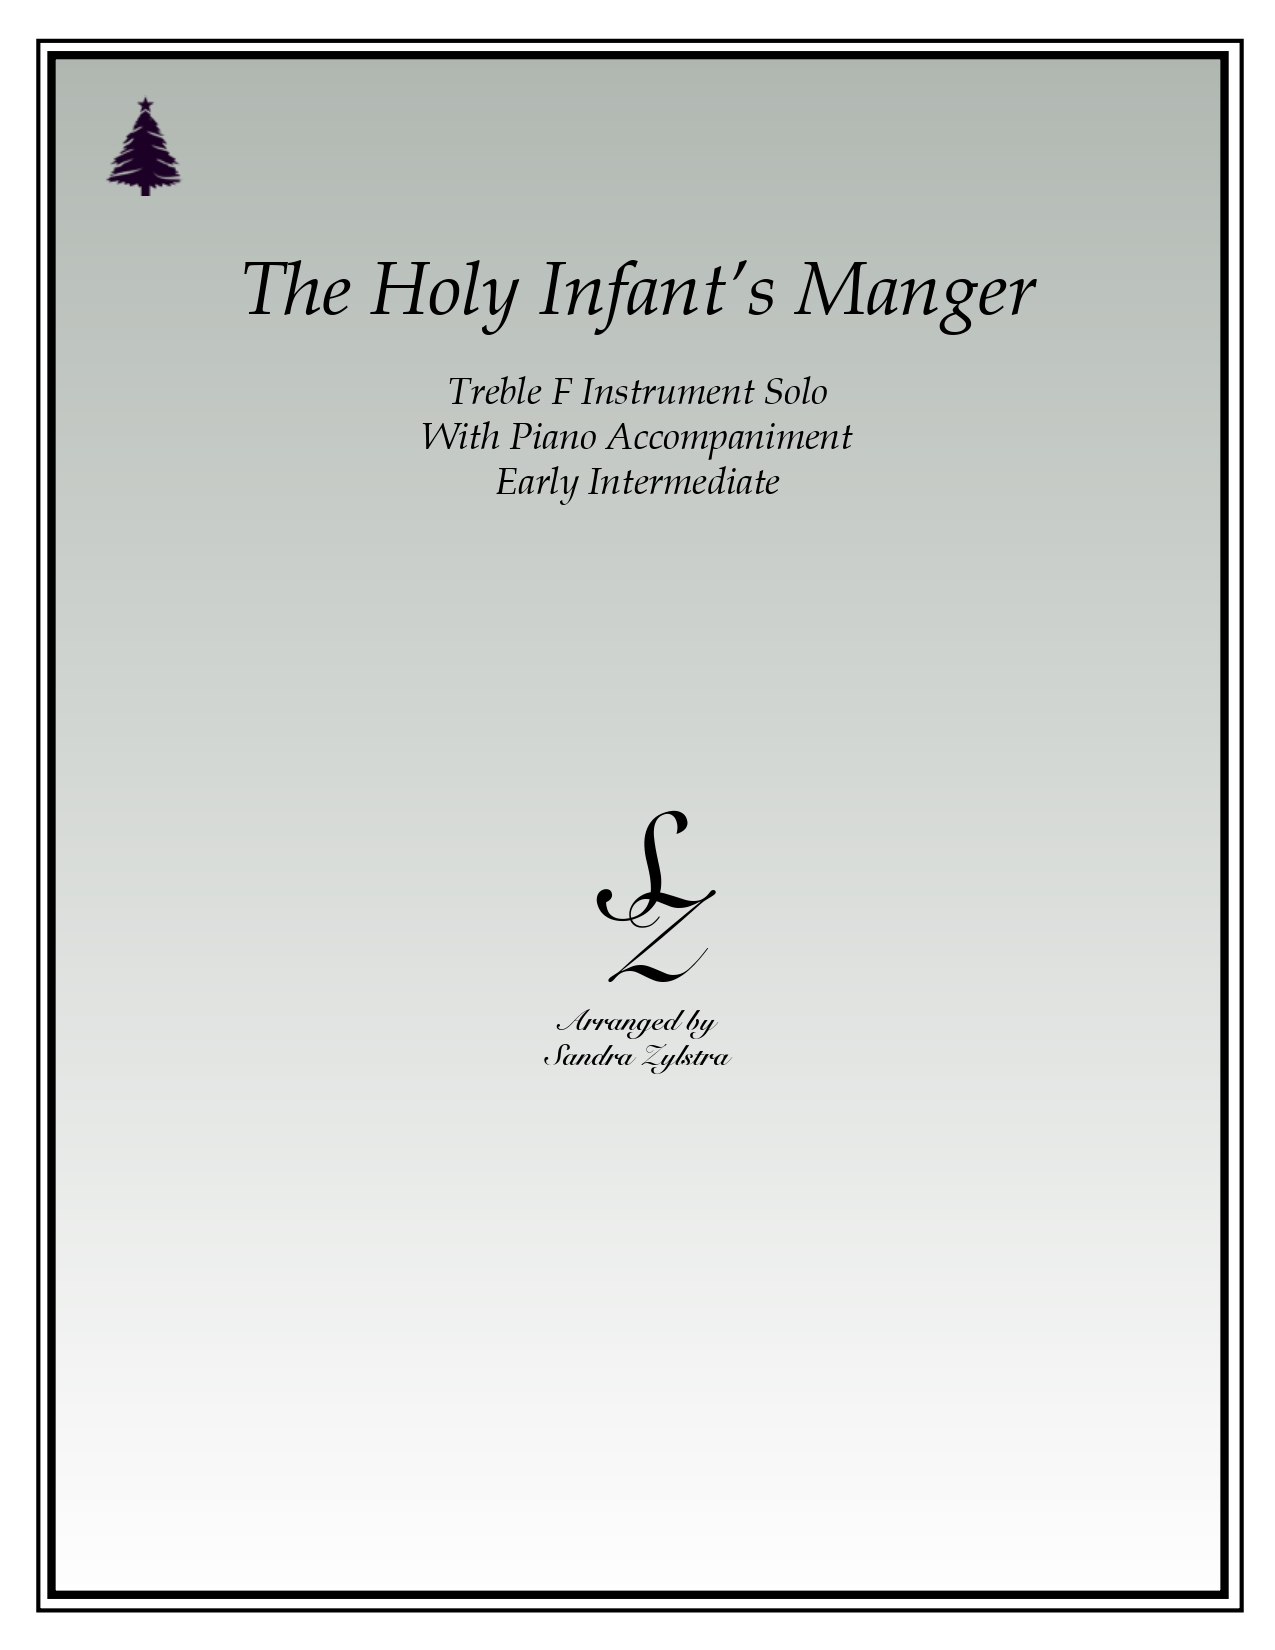 The Holy Infants Manger F instrument solo part cover page 00011